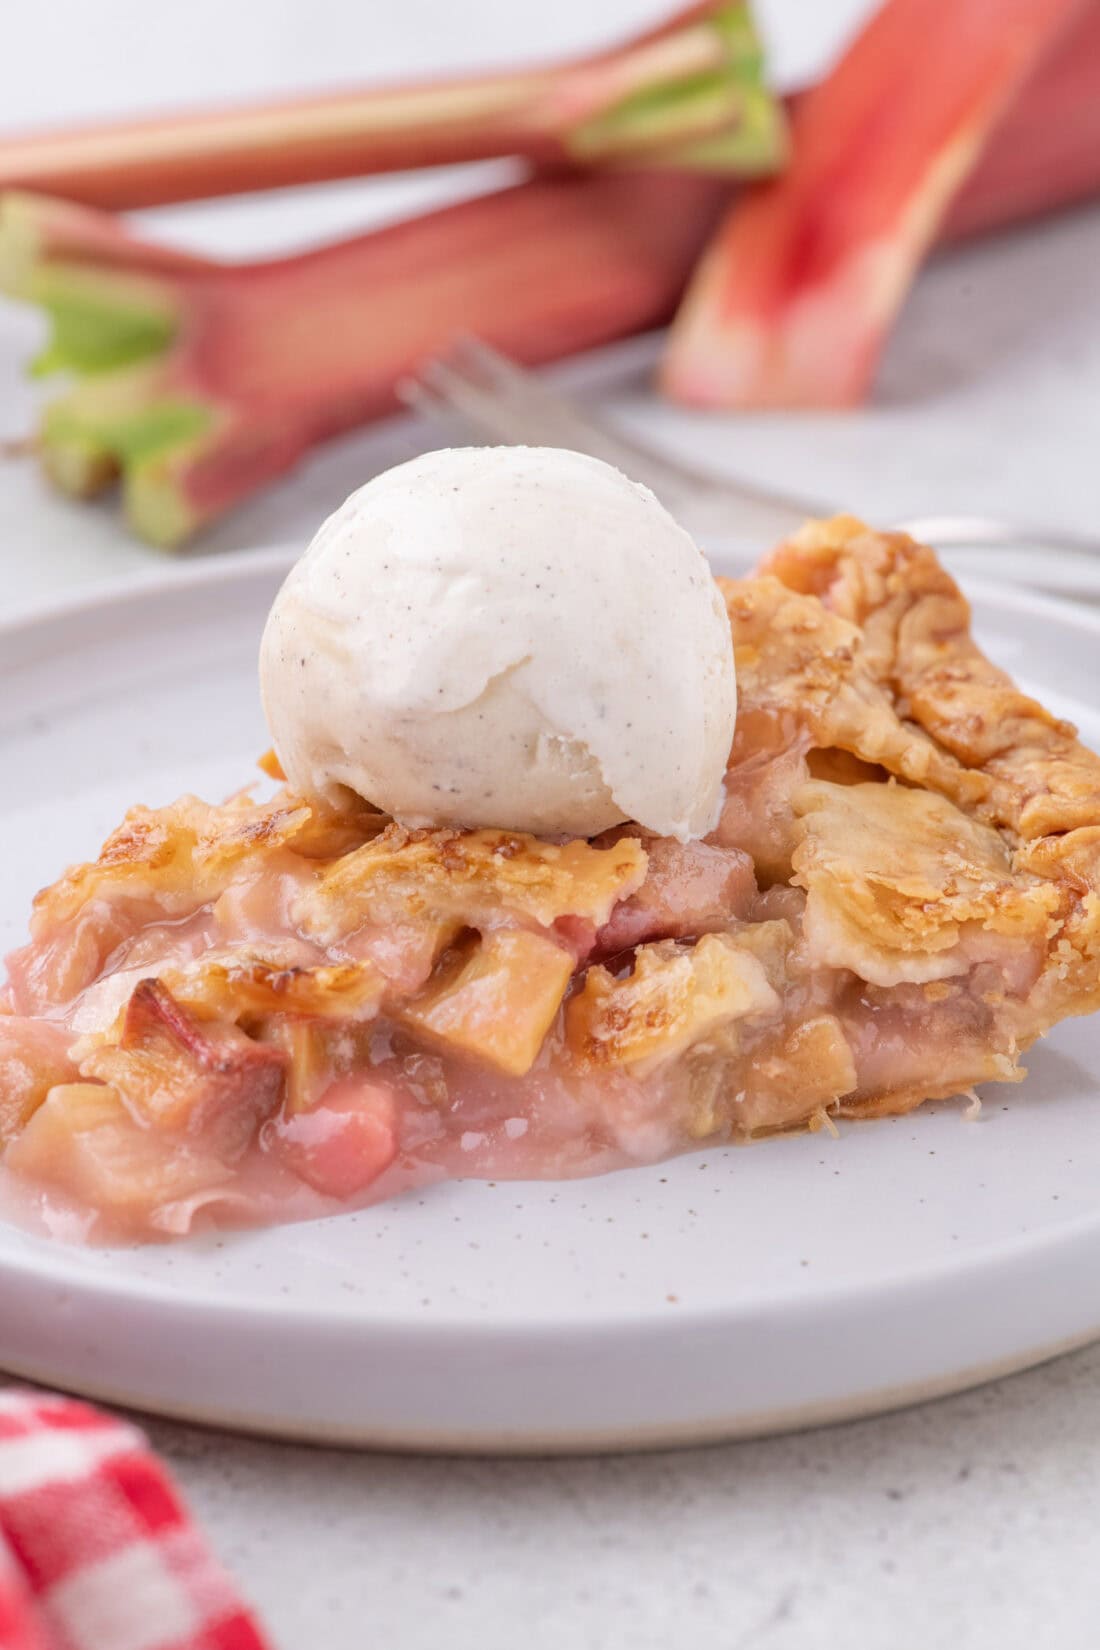 Slice of Rhubarb Pie on a plate topped with ice cream